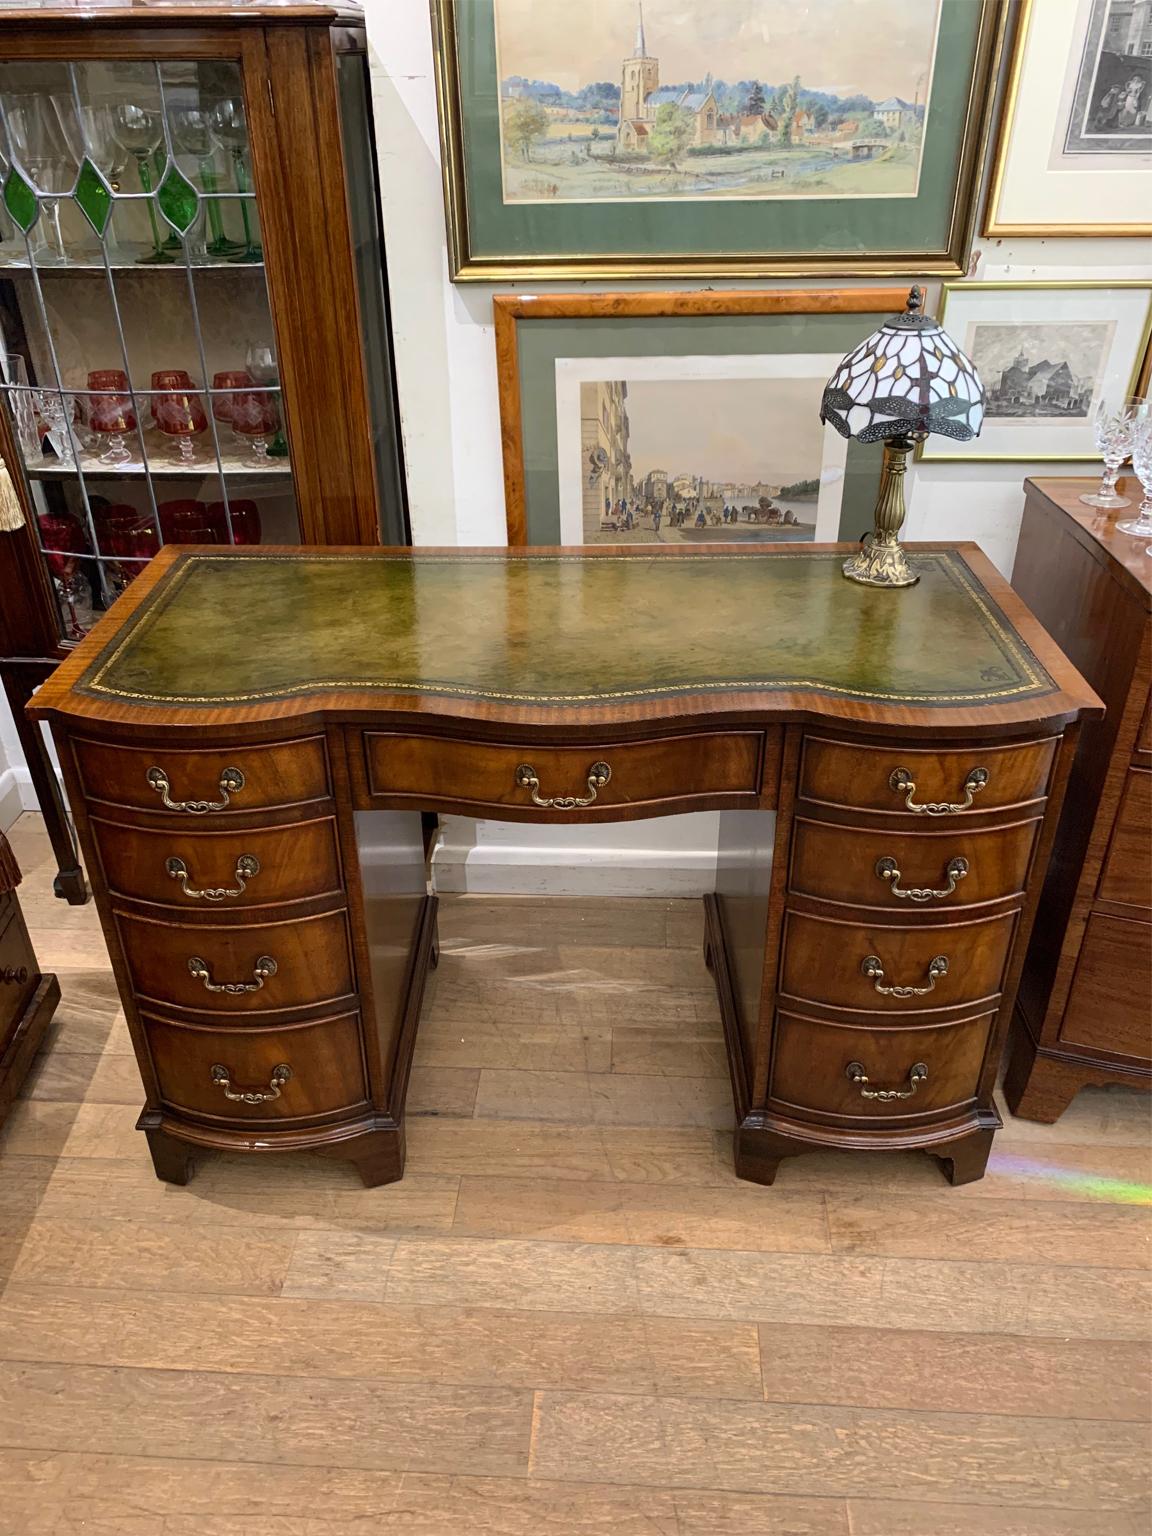 1920's Mahogany serpentine bow-shaped pedestal desk with a leathered writing surface and nine drawers, all with fitted brass swan neck handles and lined mahogany drawers.

Circa: 1920

Dimensions:
Width: 45 inches – 115 cms
Height: 29.5 inches